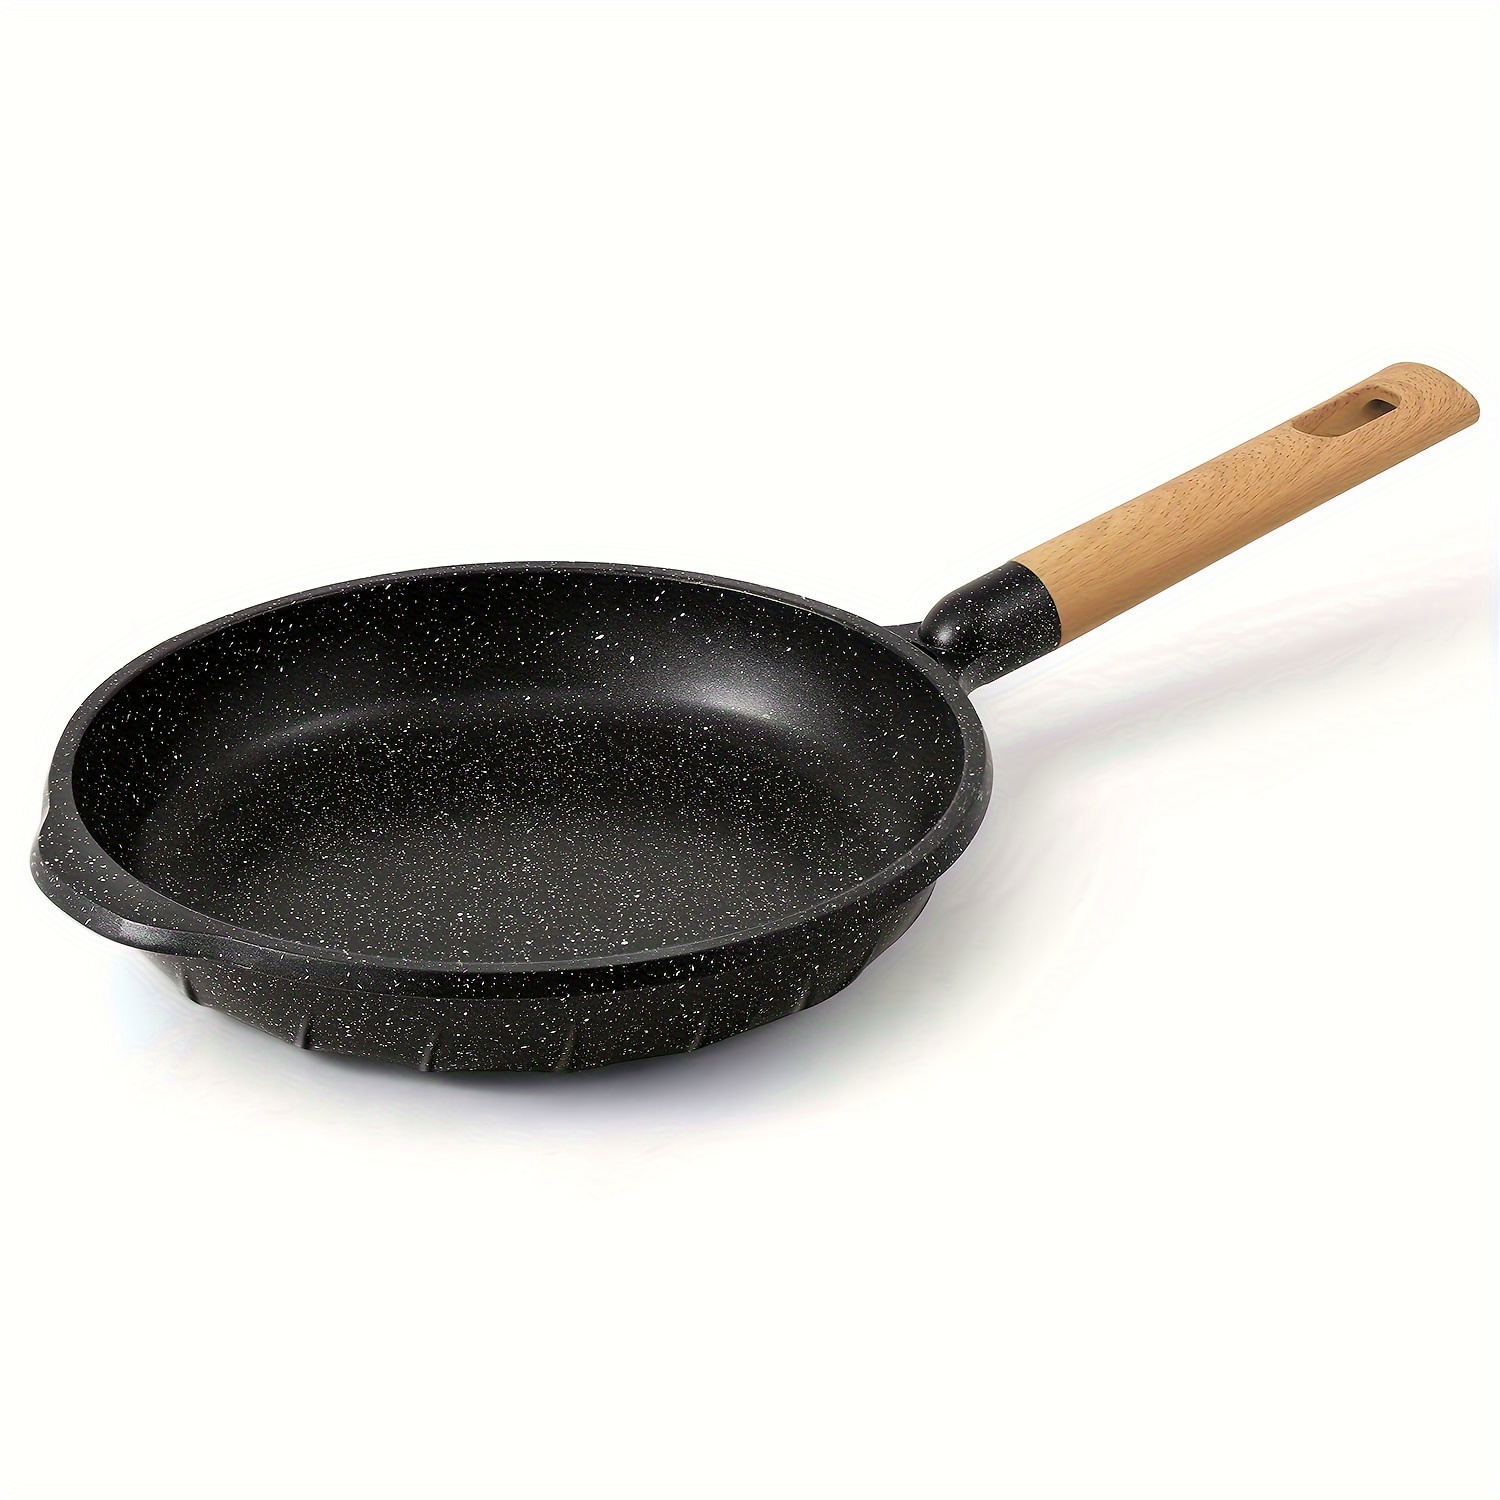 COOKLOVER Nonstick Saute Pan with Lid Non Toxic PTFE & PFOA Free